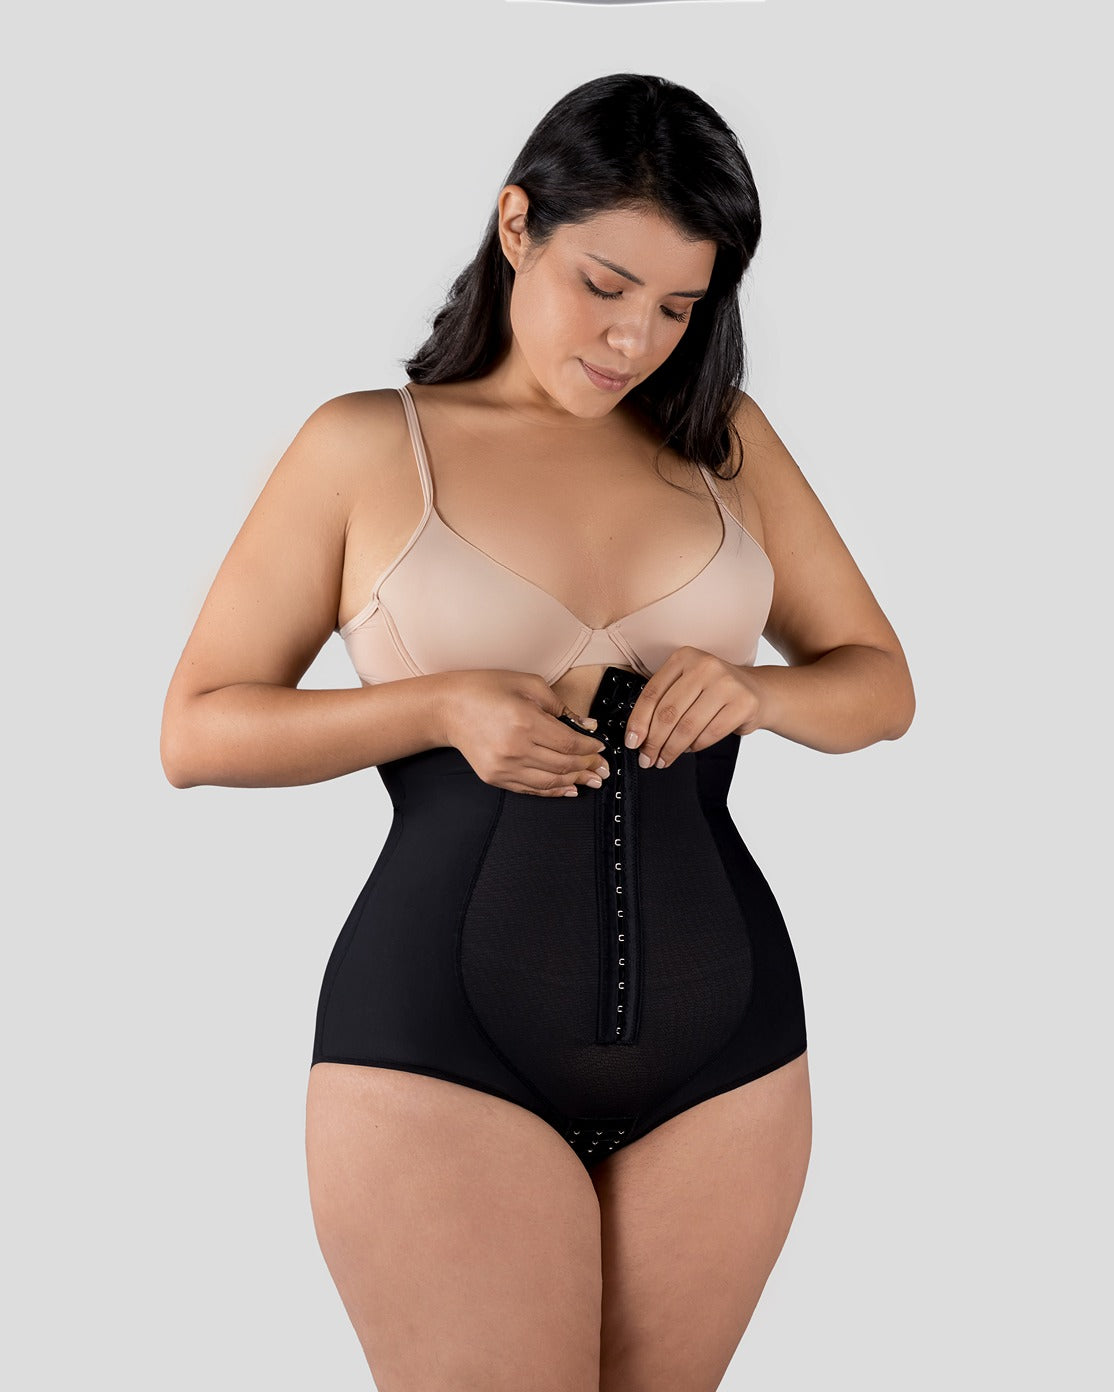 Compression Girdles Why Use One For Your Postpartum Recovery